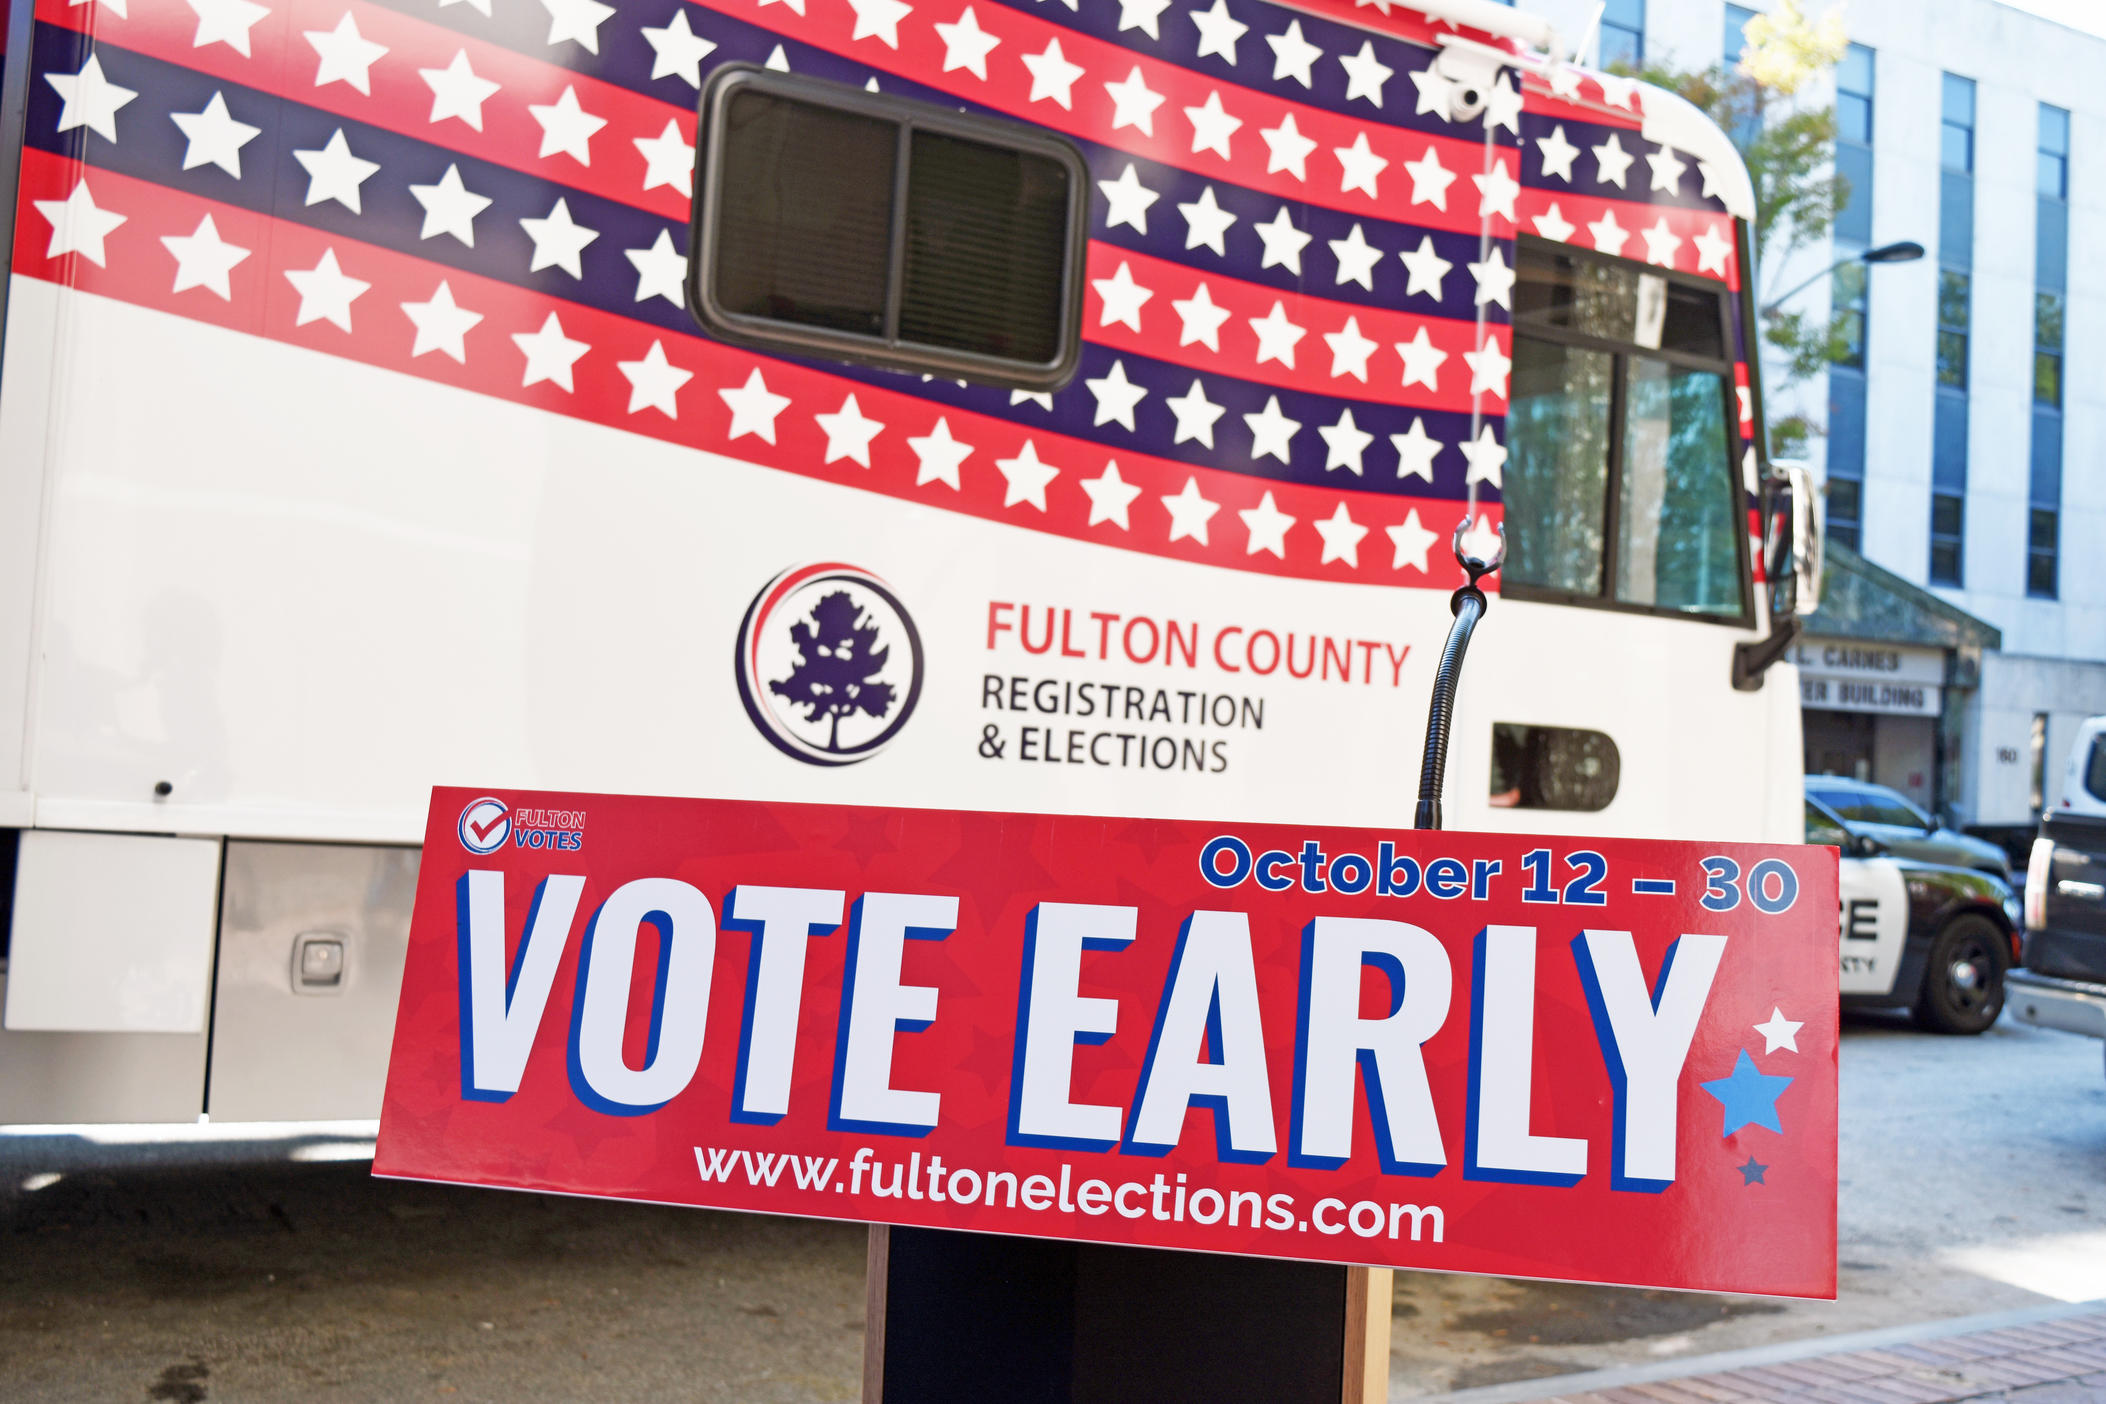 Fulton County has launched a massive early voting effort ahead of the November 2020 election.